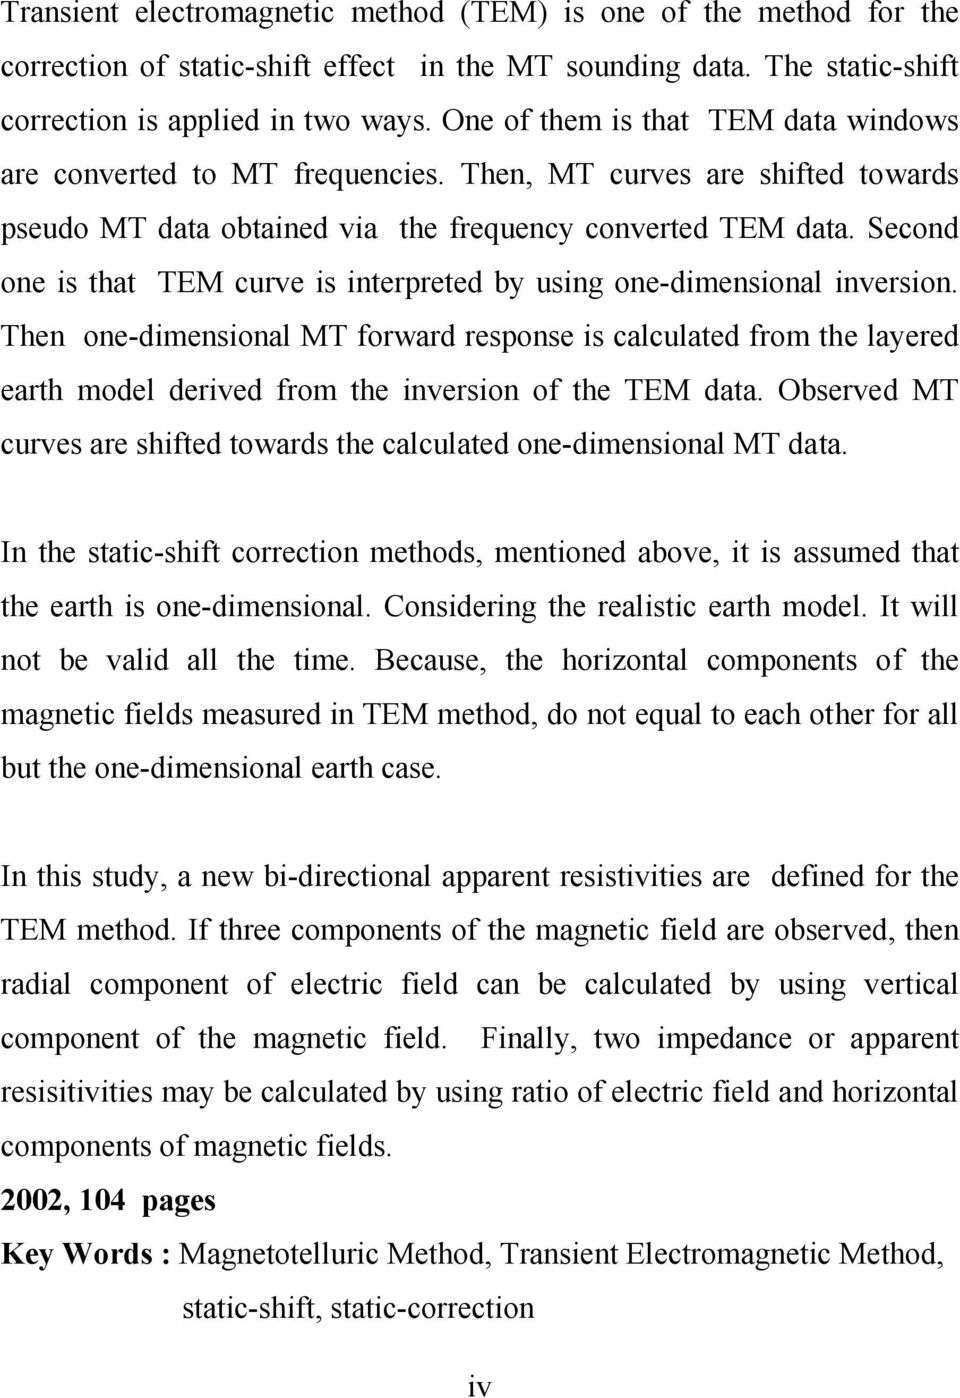 Second one is that TEM curve is interpreted by using one-dimensional inversion.